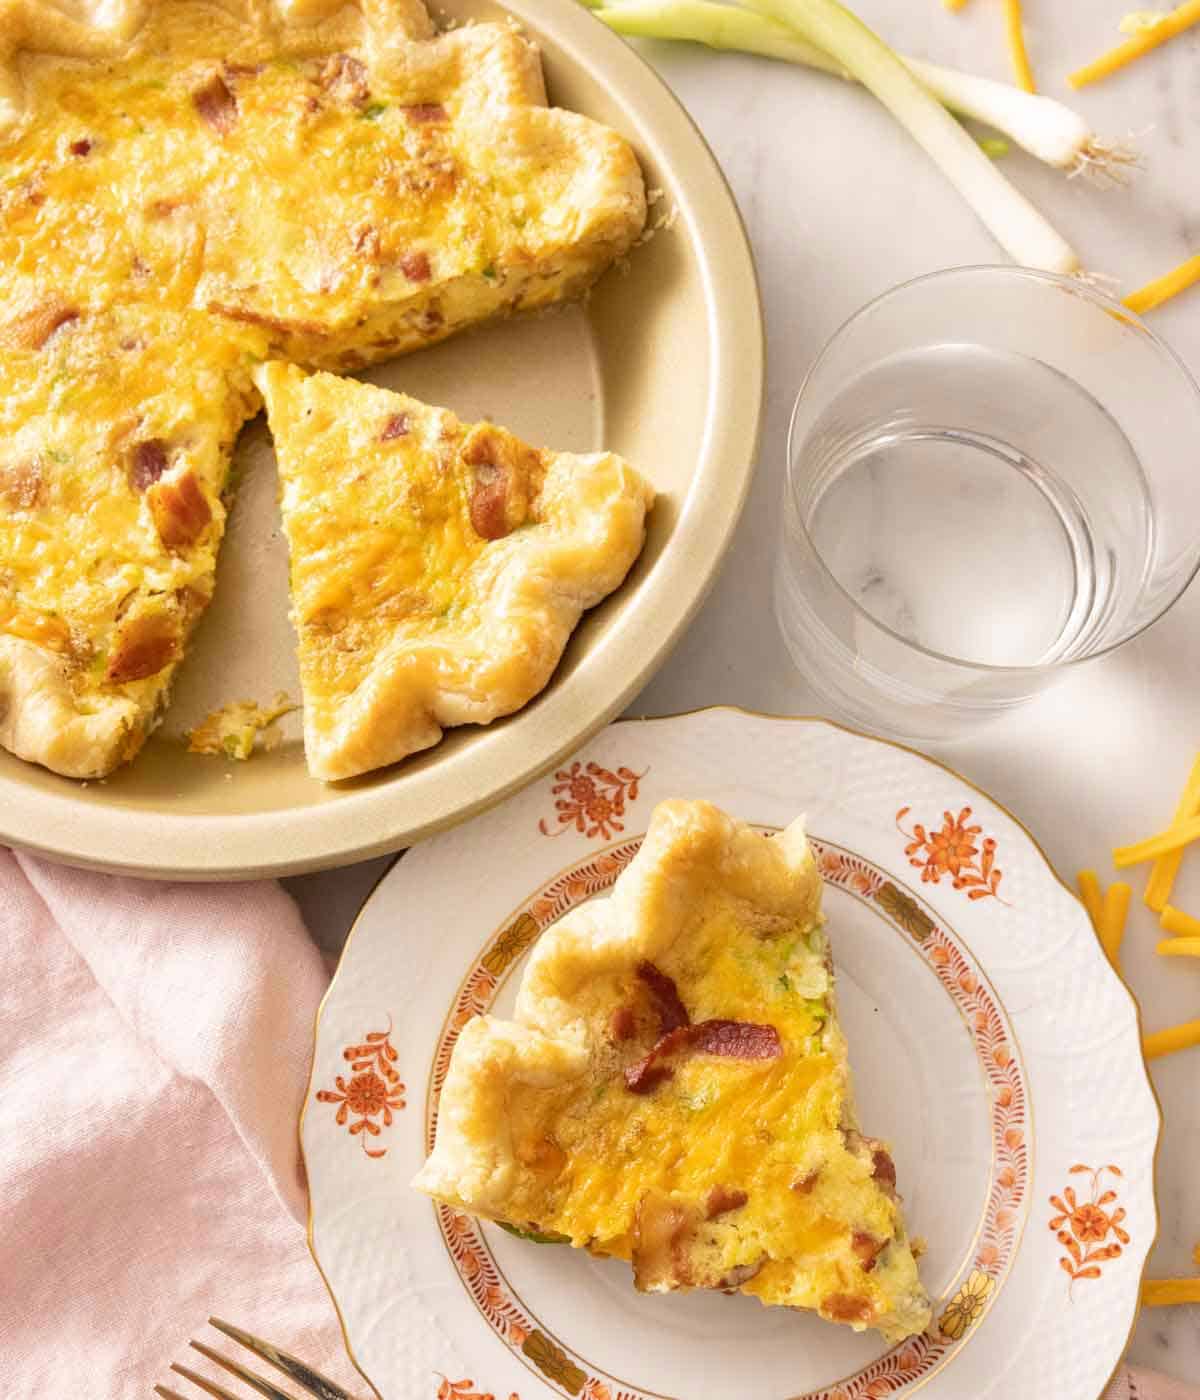 Overhead view of a slice of quiche on a plate beside a dish with the rest.